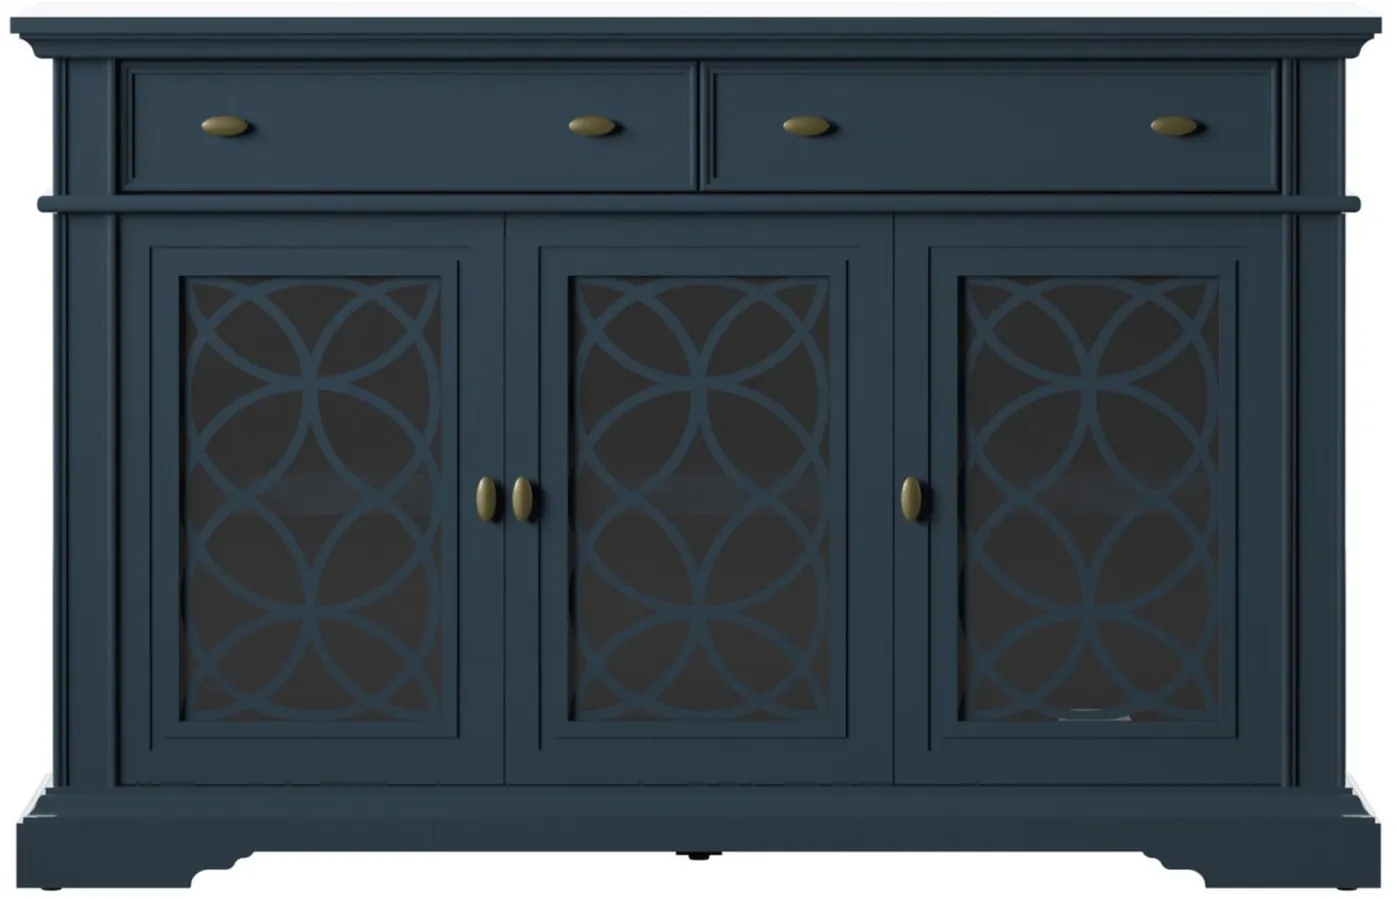 Lina 55" TV Stand with Drawers in Fontana Blue by Twin-Star Intl.